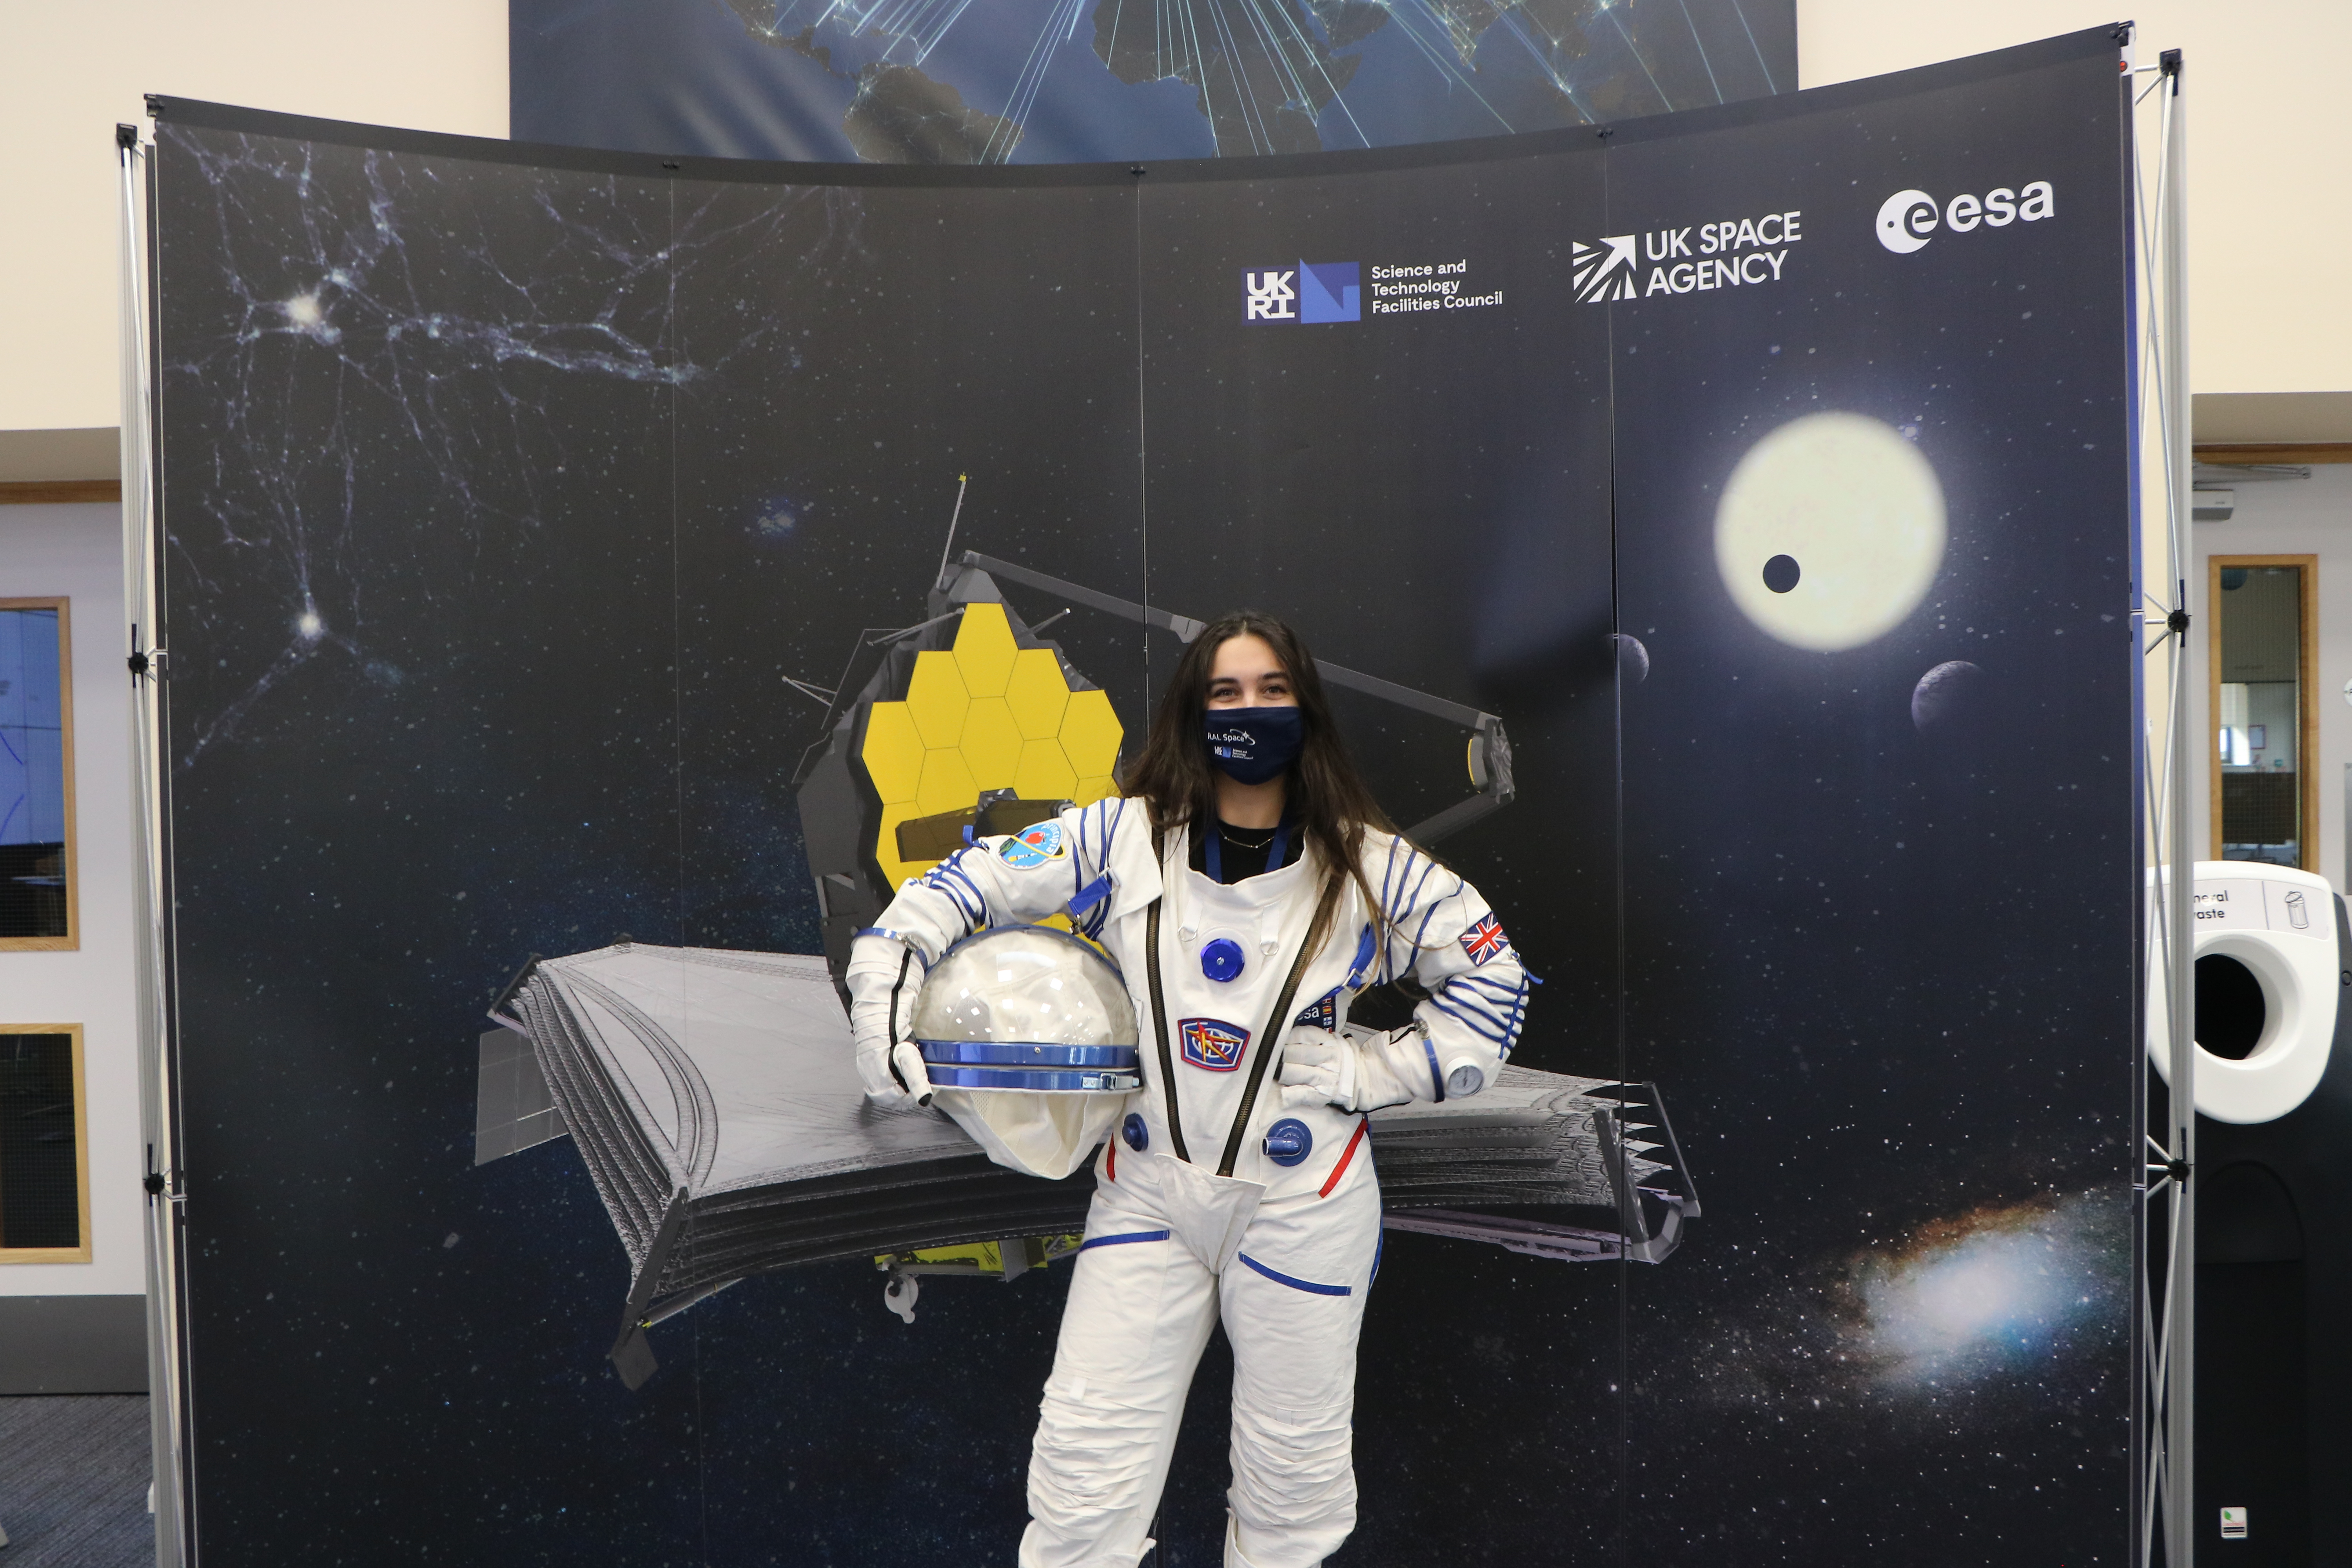 A young woman with long dark hair stands smiling wearing an astronaut suit and face mask.